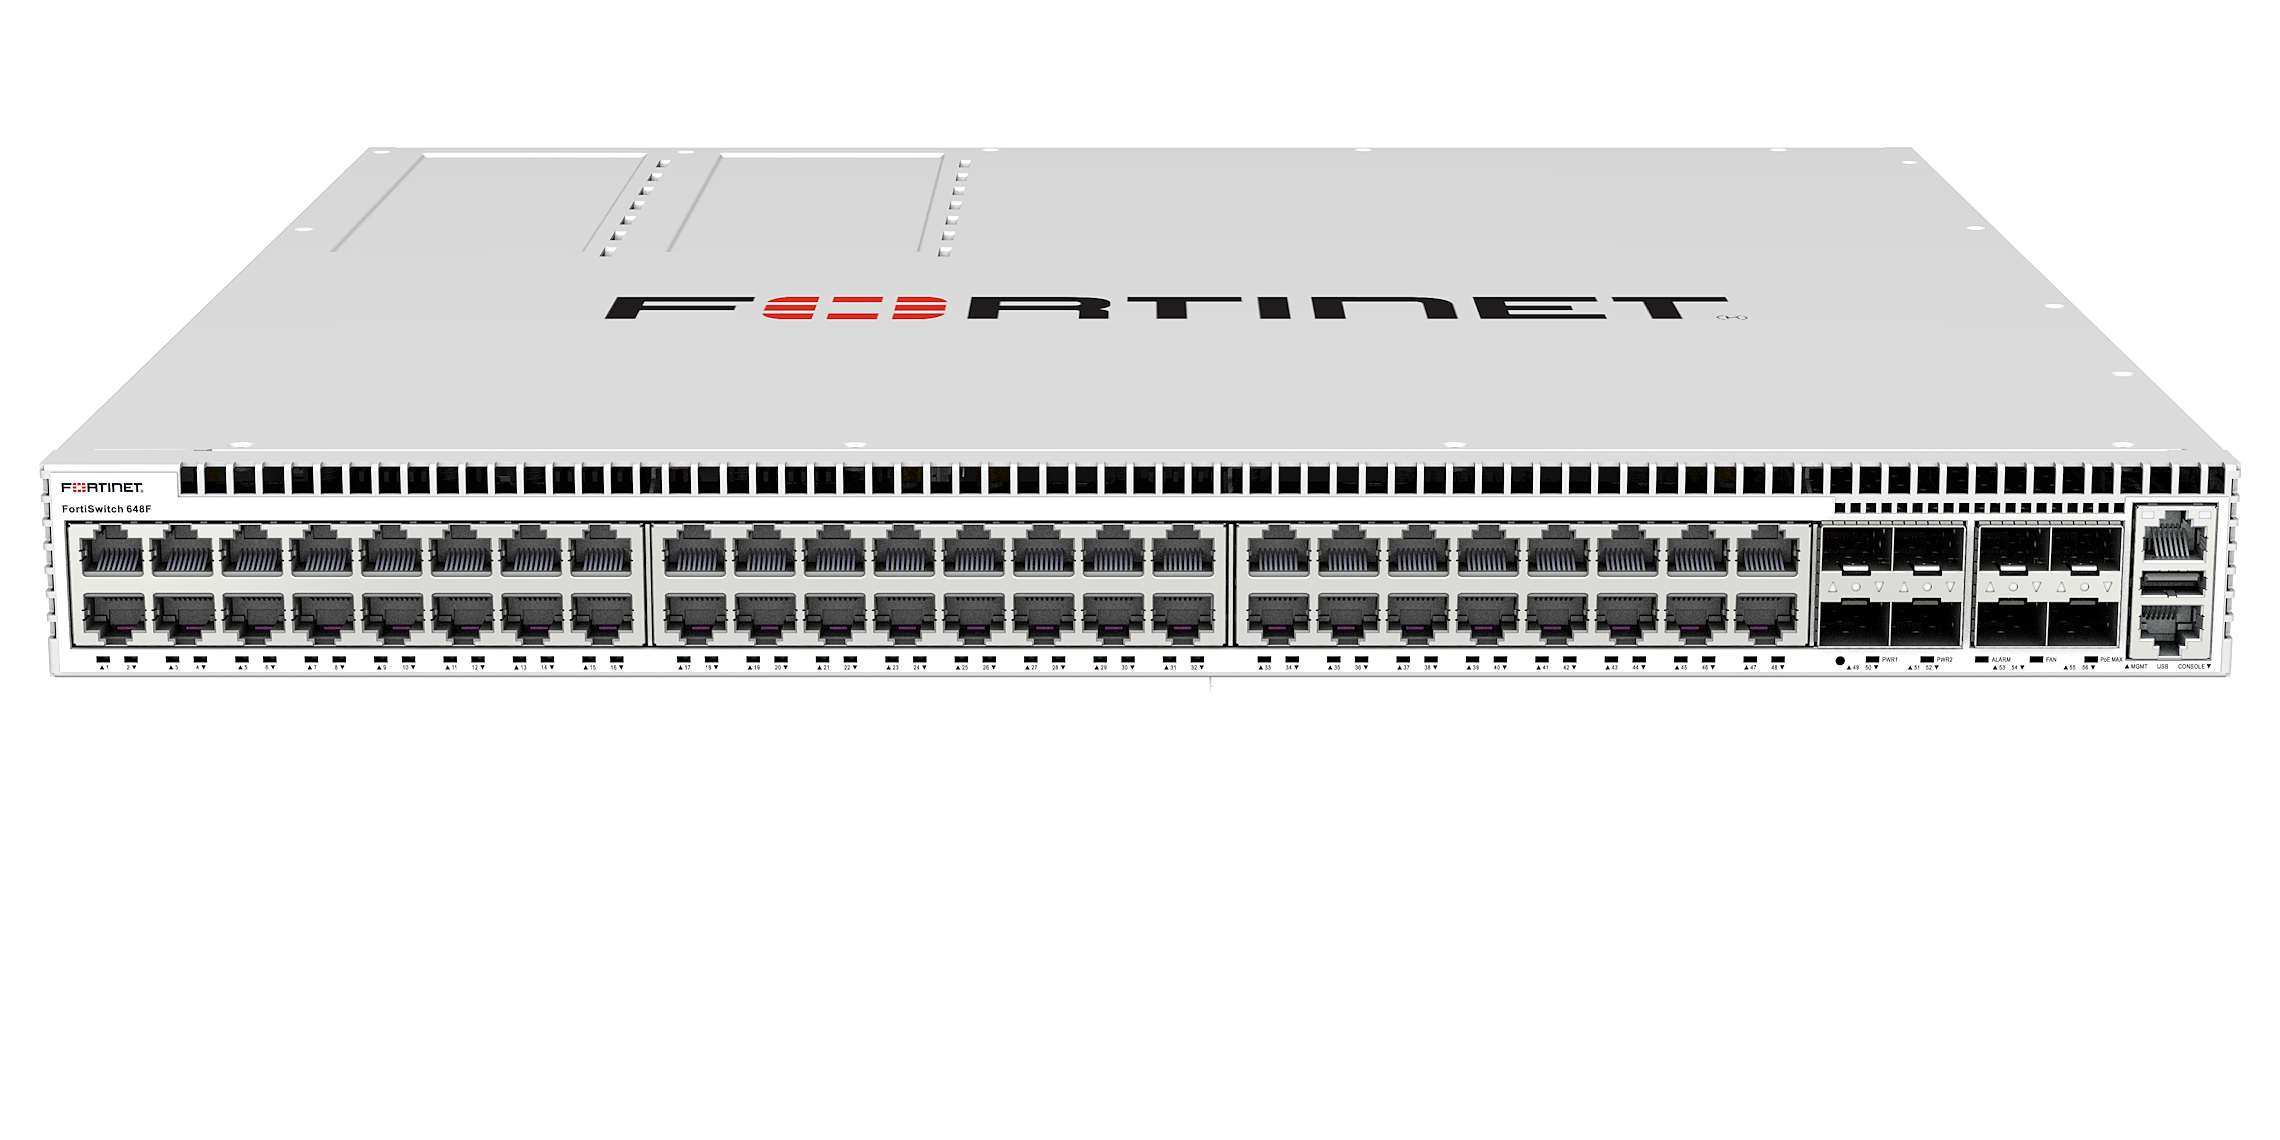 Fortinet FortiSwitch-648F